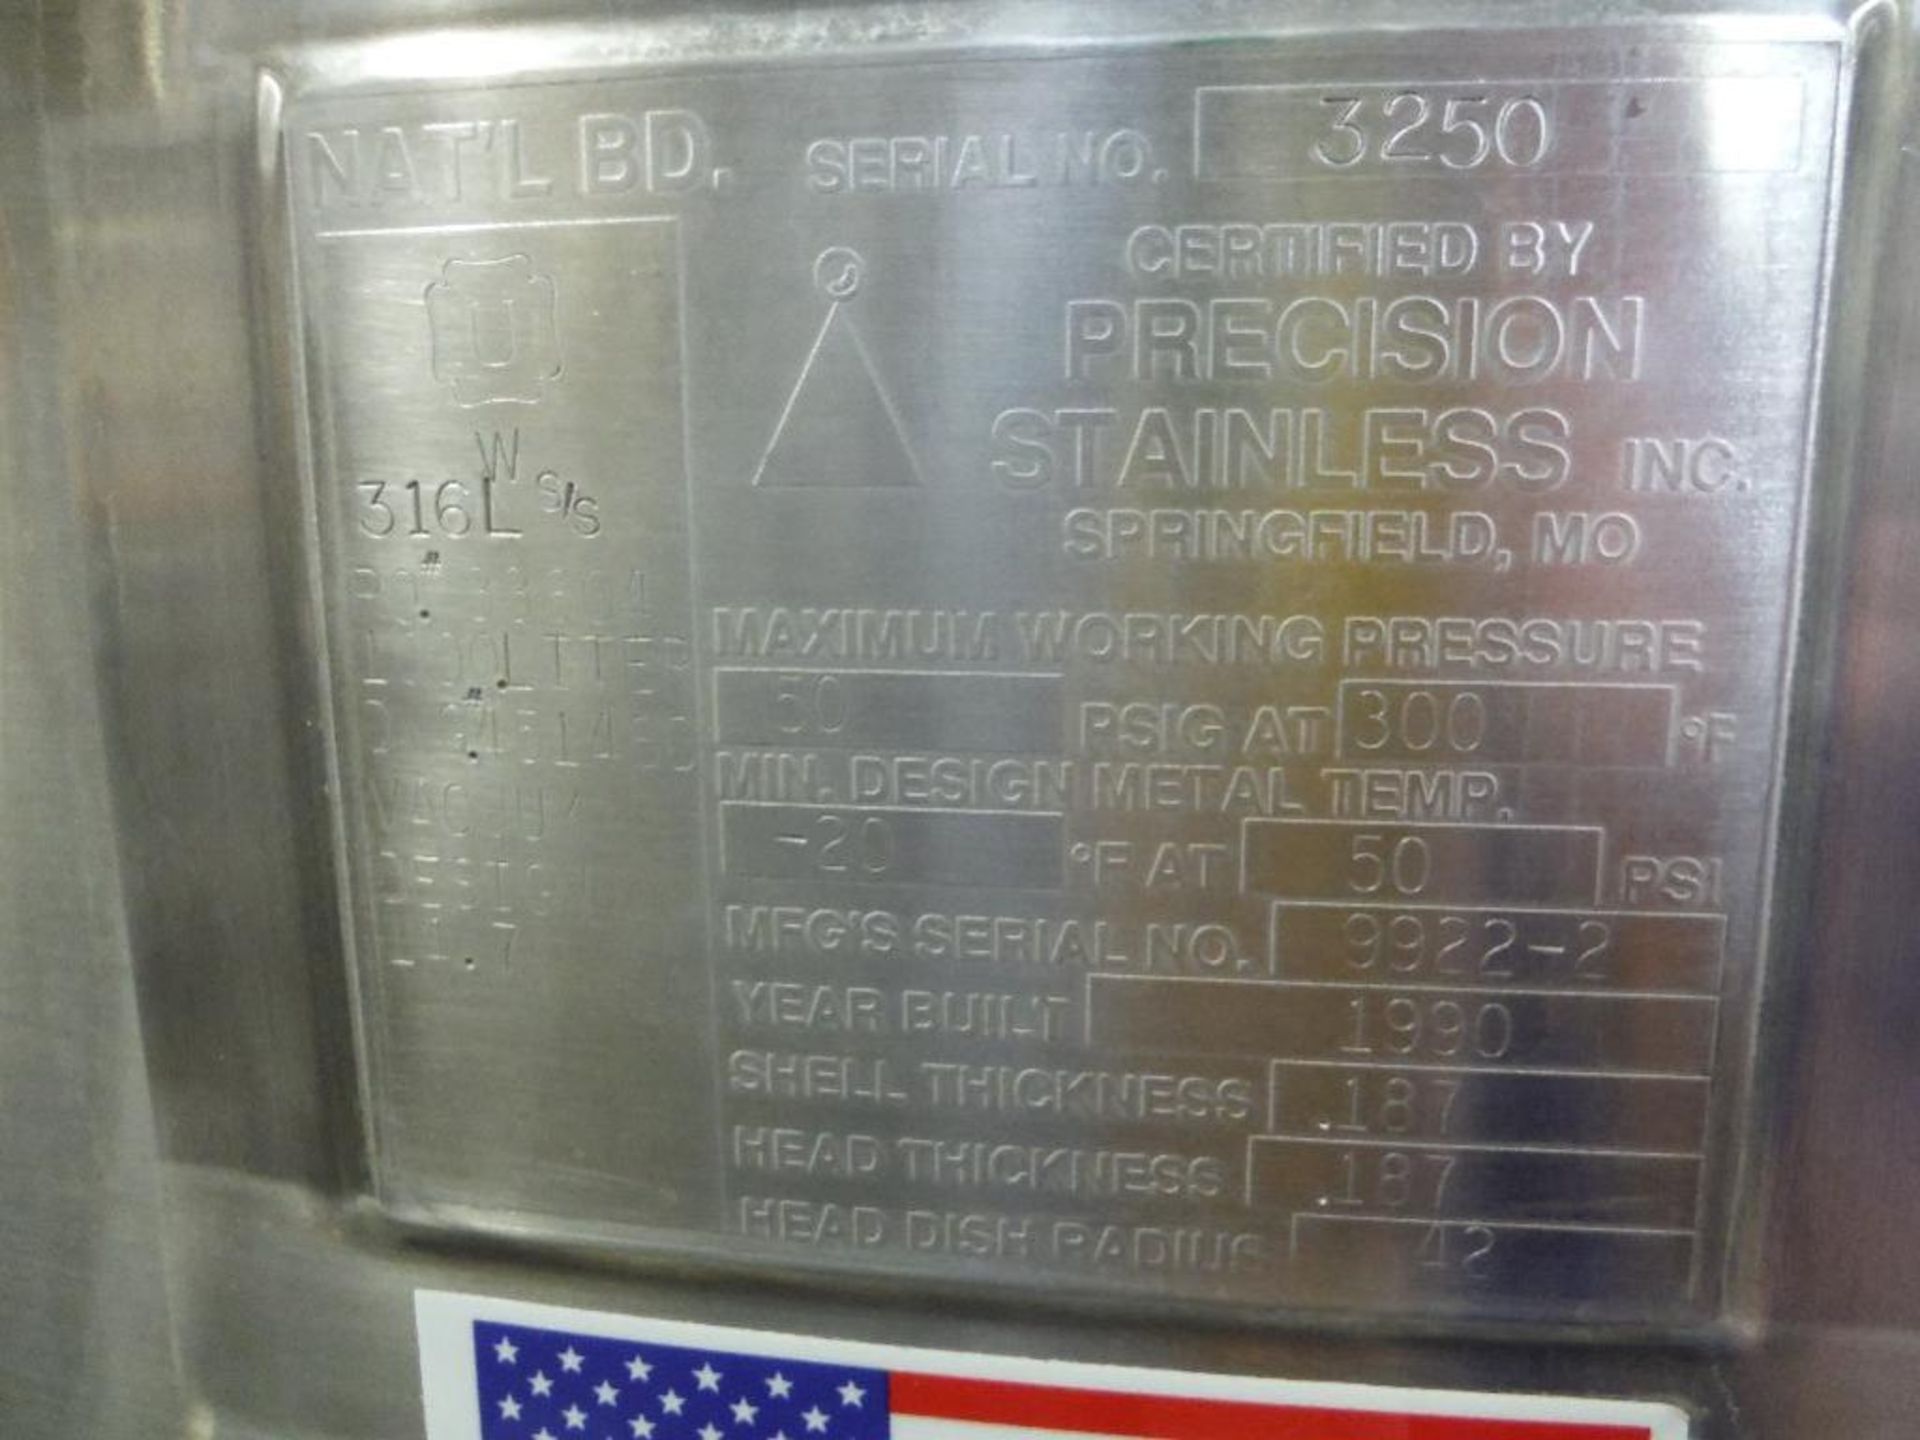 1990 Precision vacuum kettle, SN 9922-2, 316 SS, 1000 L capacity, insulated, CIP ball, 45 in. dia x - Image 5 of 8